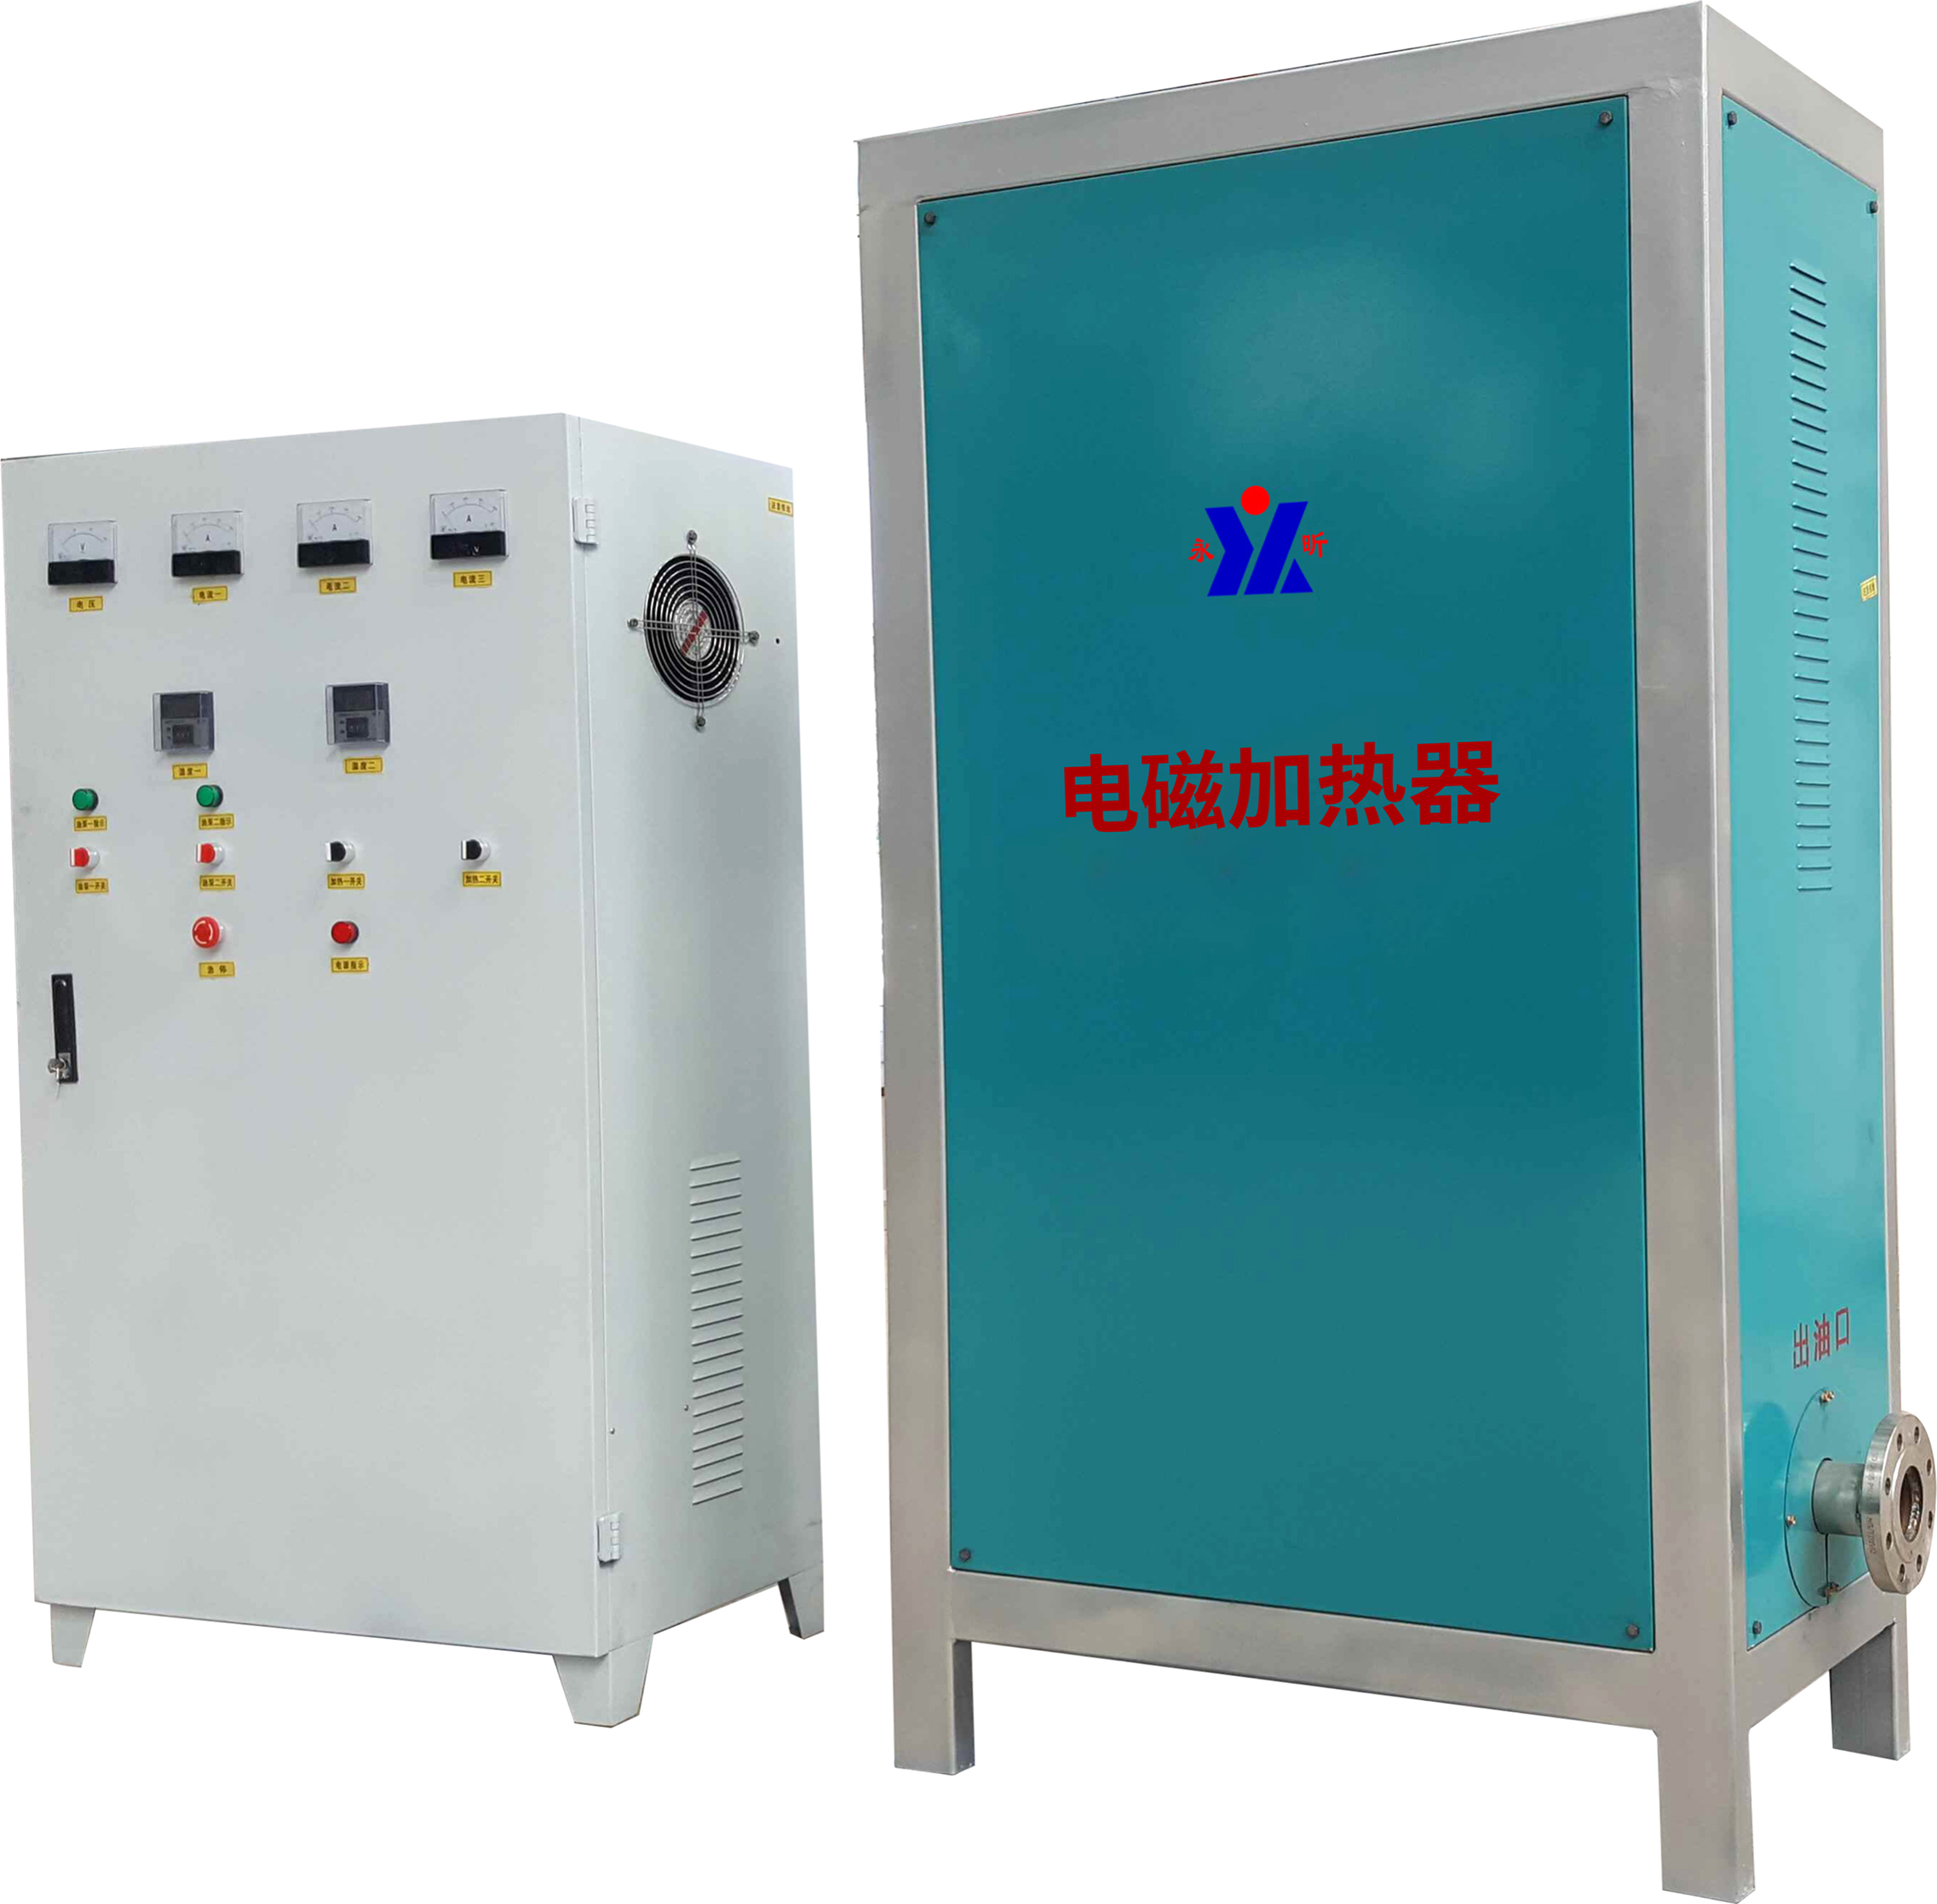 Electromagnetic Heat Conducting Oil Furnace